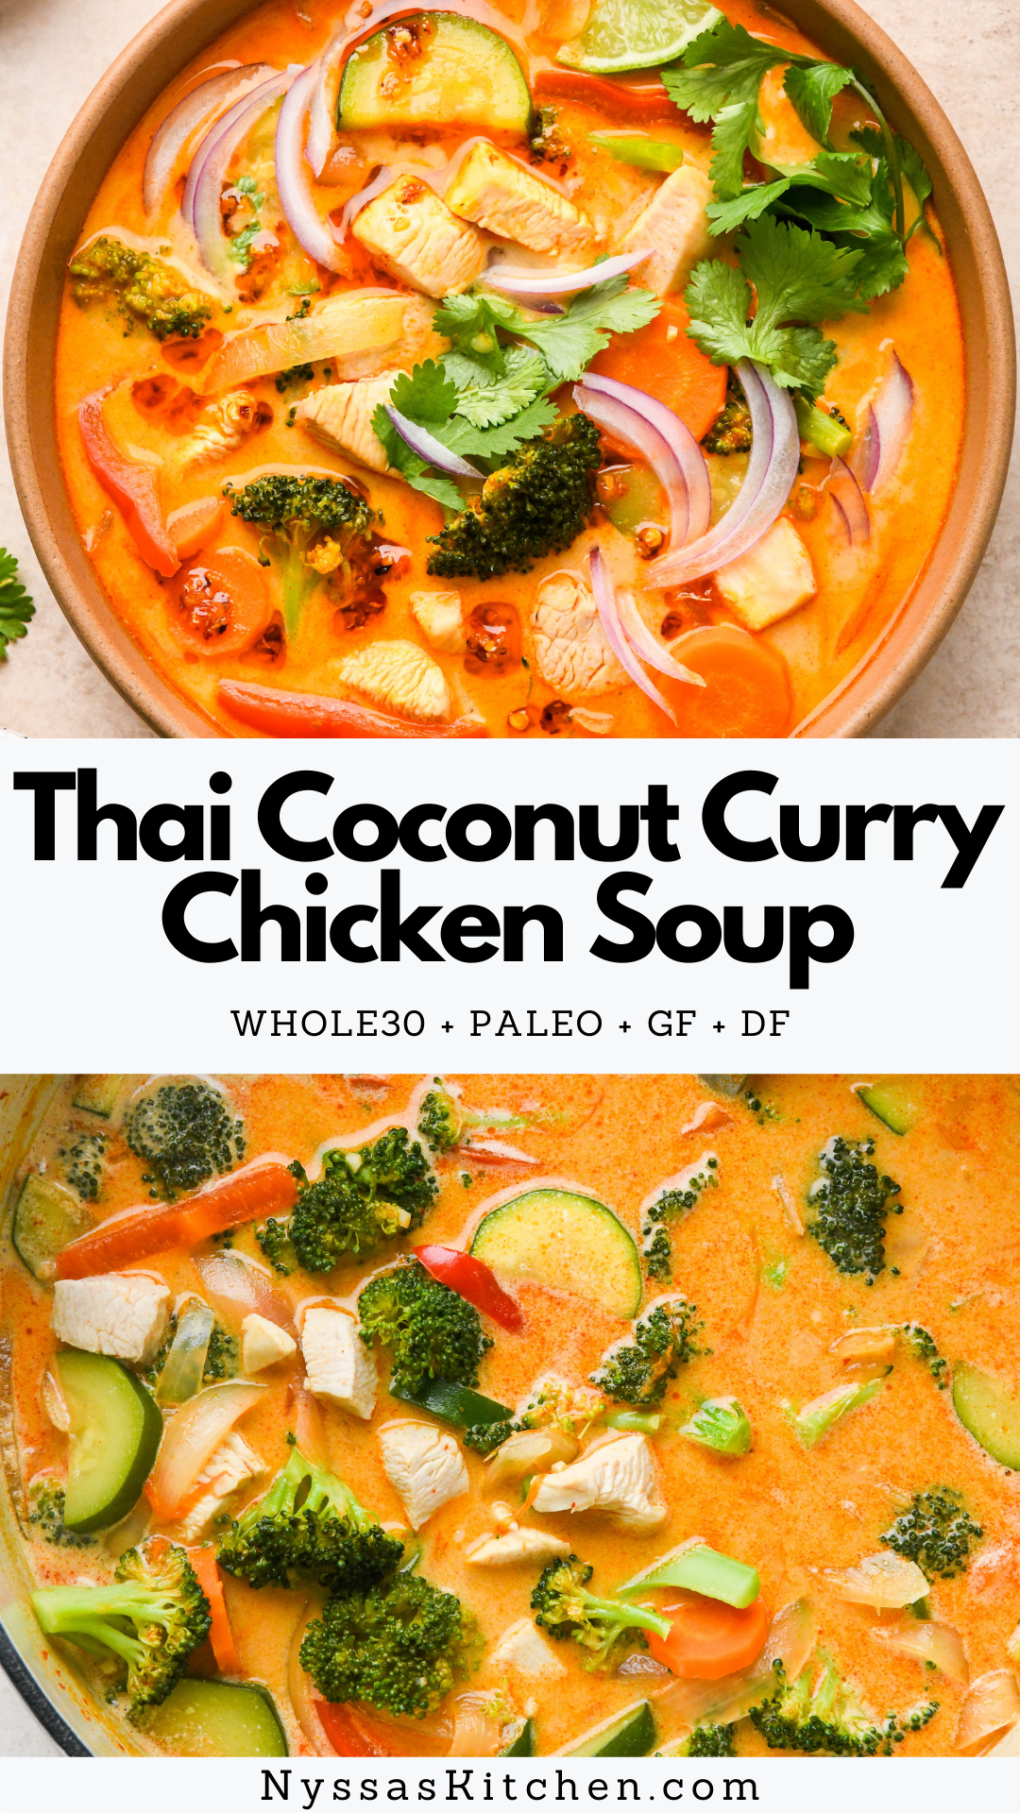 Pinterest Pin for Thai Coconut Curry Chicken Soup